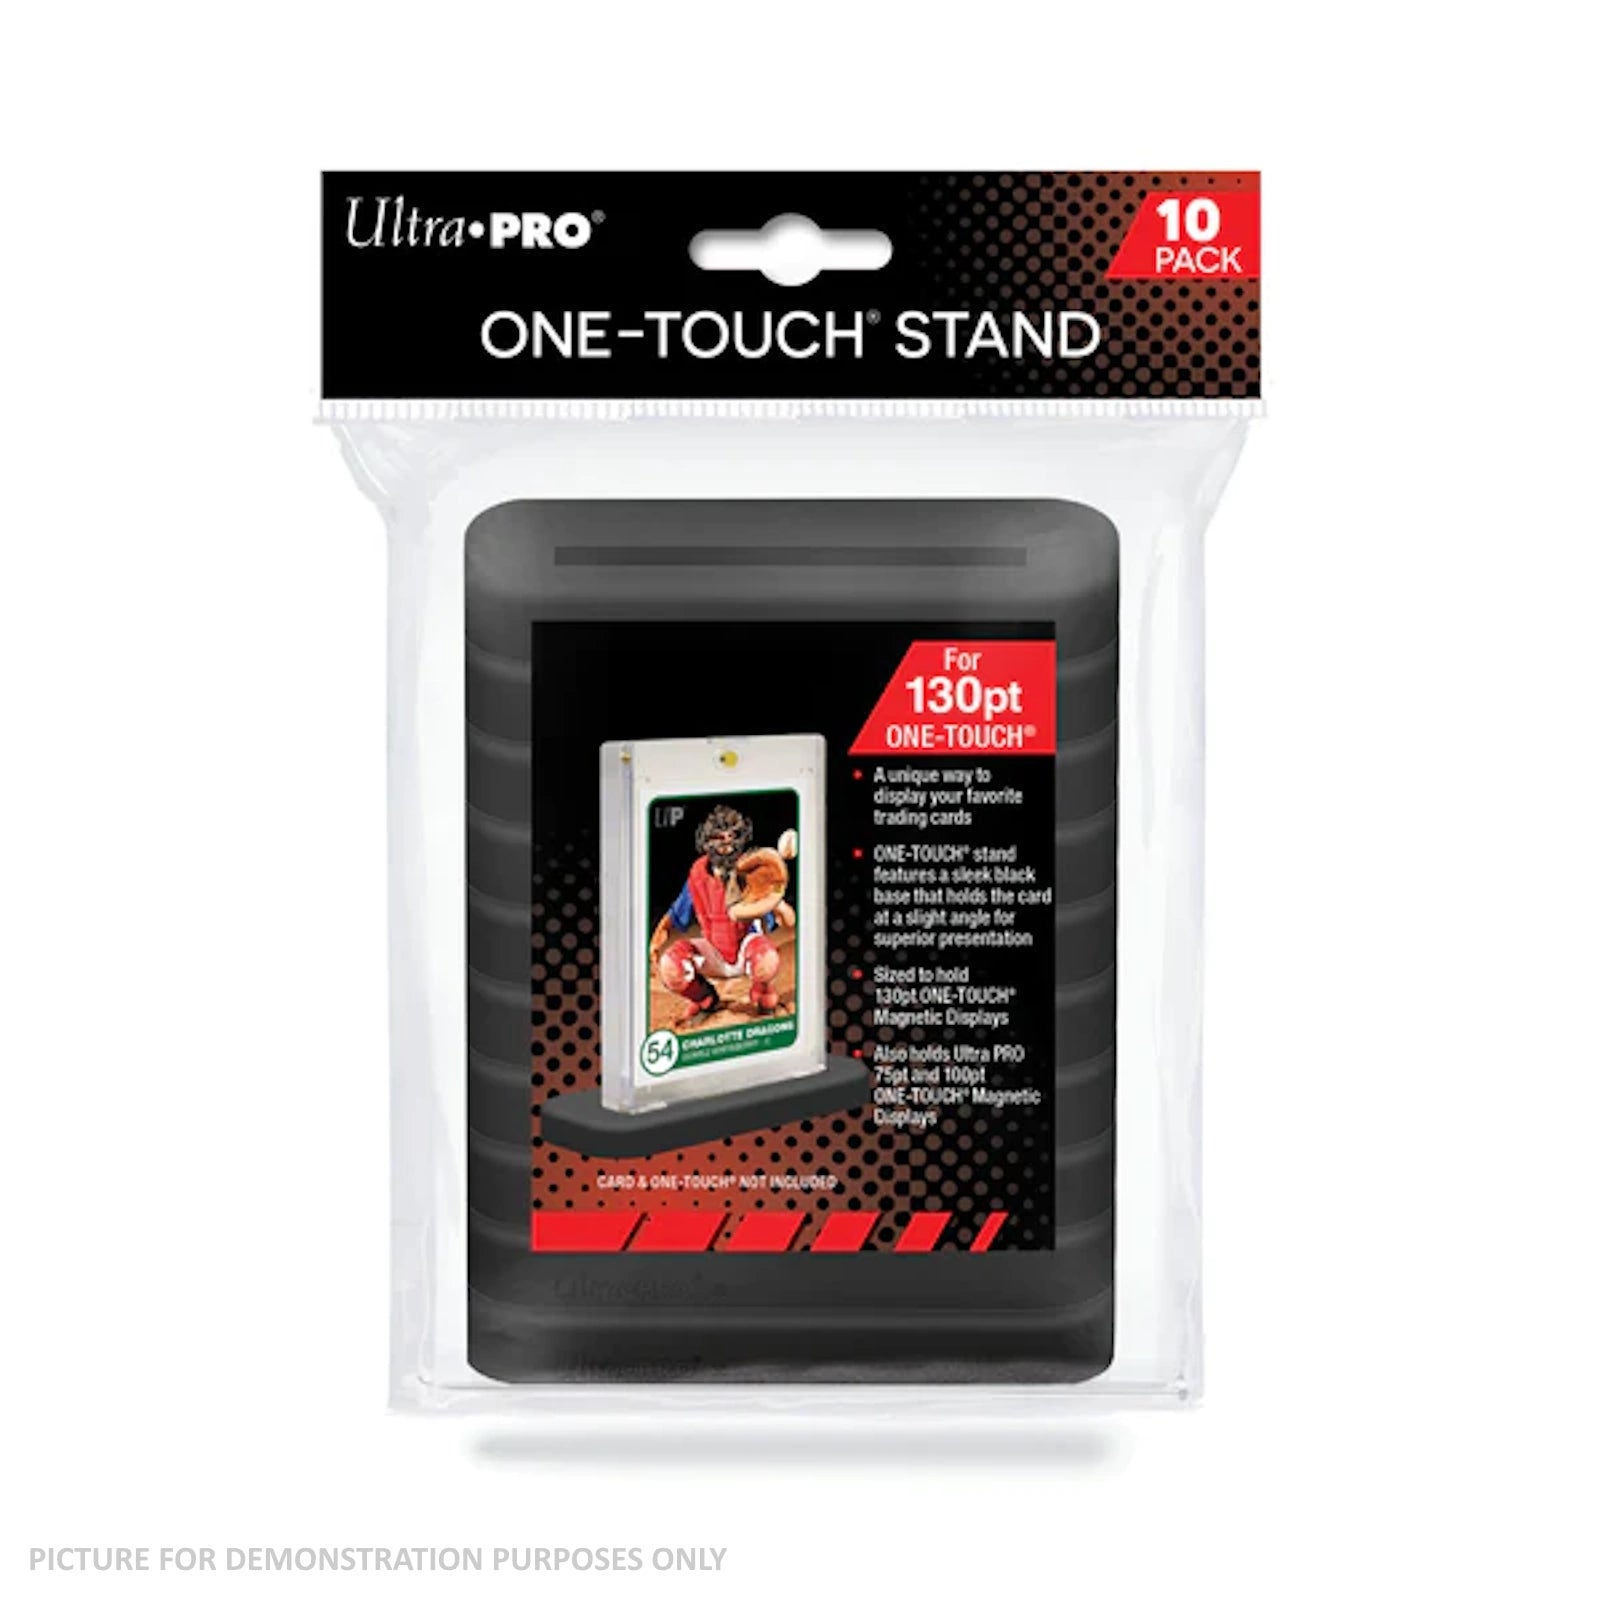 Ultra Pro One-Touch 130pt Stands - Pack of 10